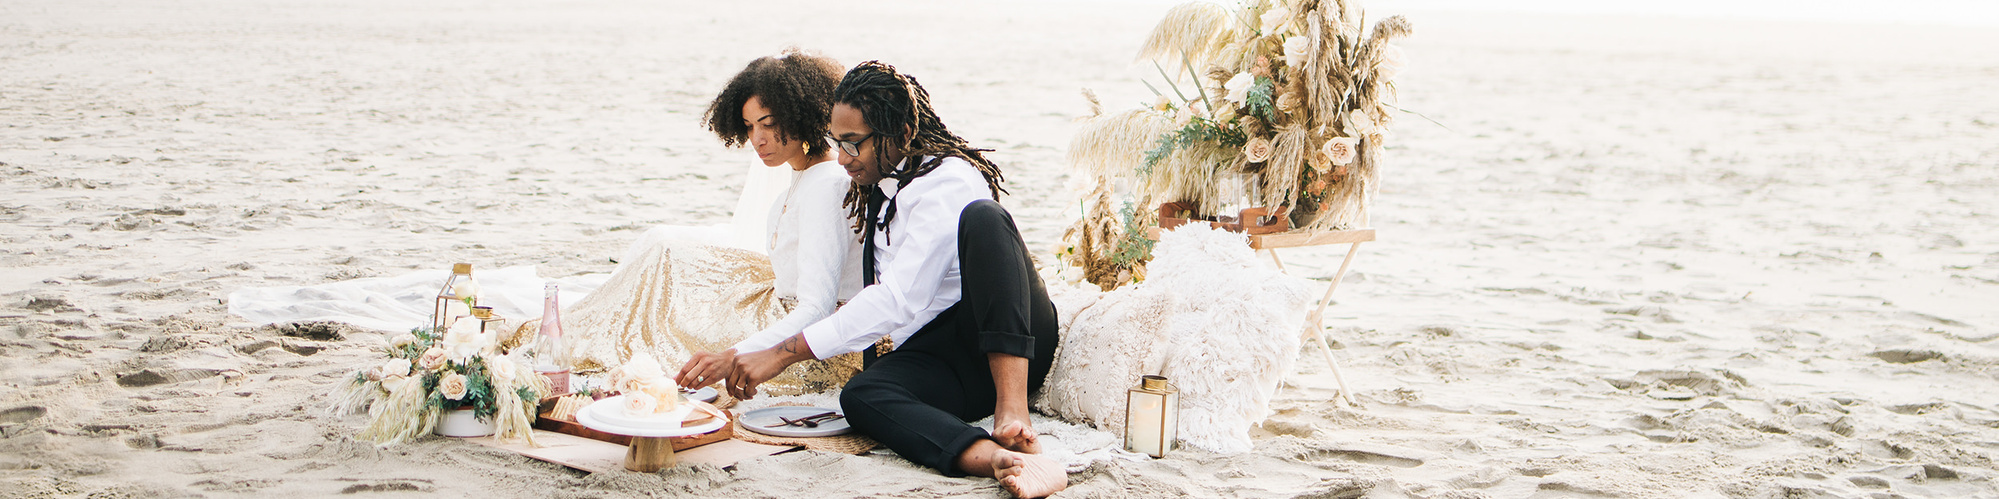 An eloping bride and groom sit on a beach blanket surrounded by elaborate florals, feasting on charcuterie, champagne, and cake